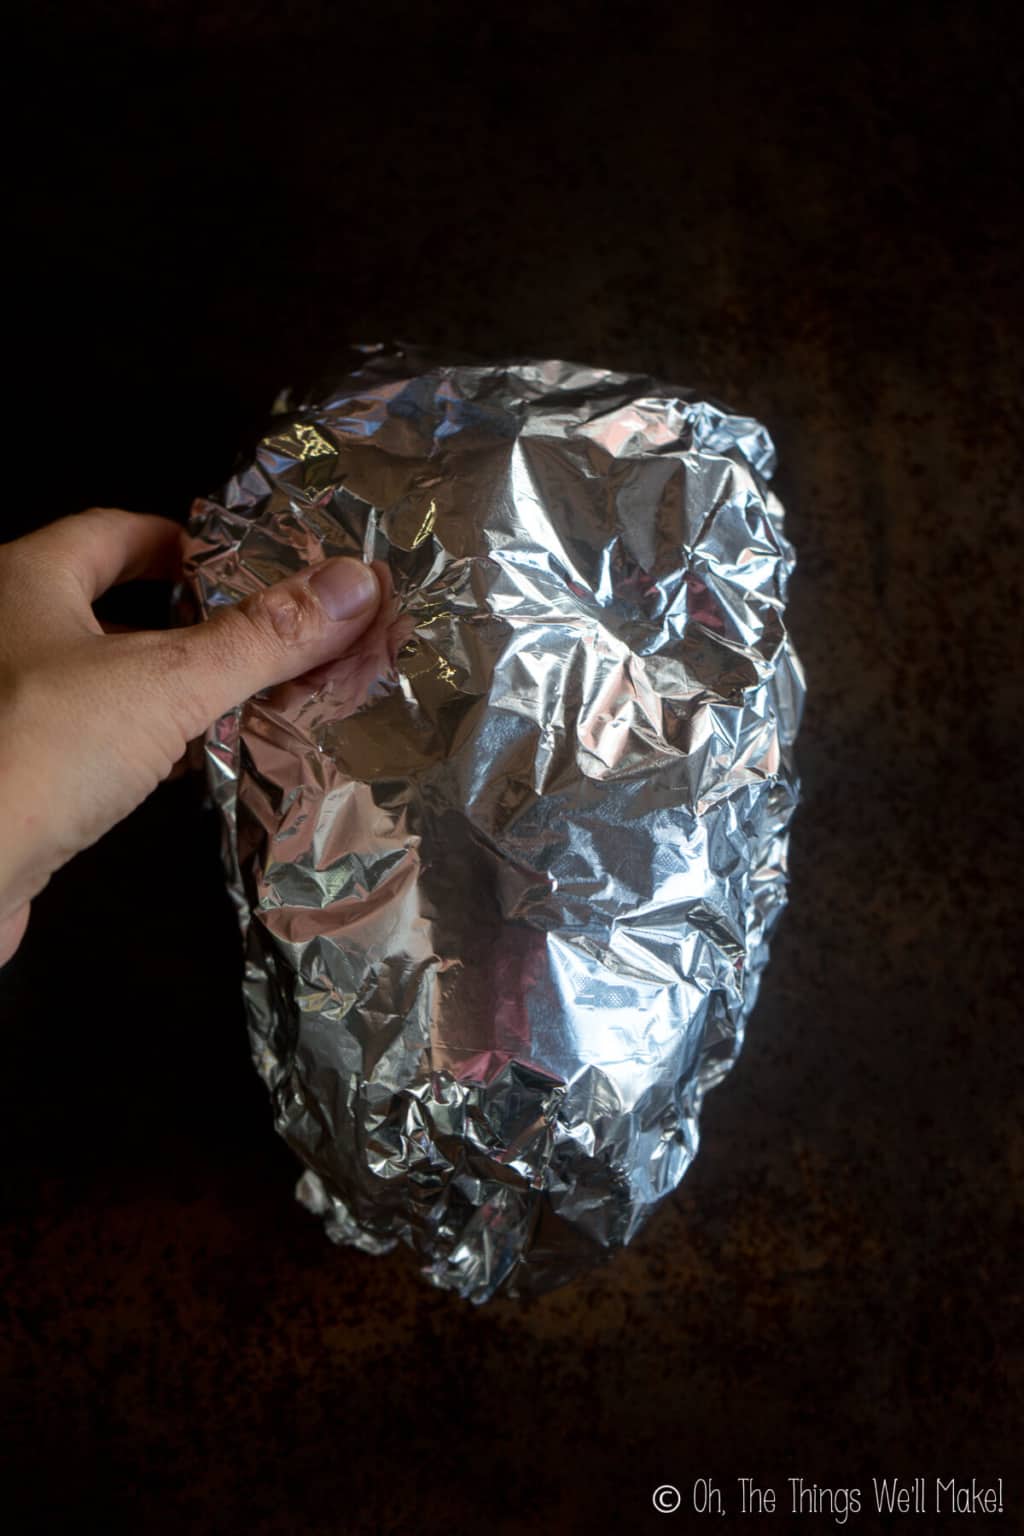 A thumb pressing into an oval spheroid covered with aluminum foil to make eye socket shapes.